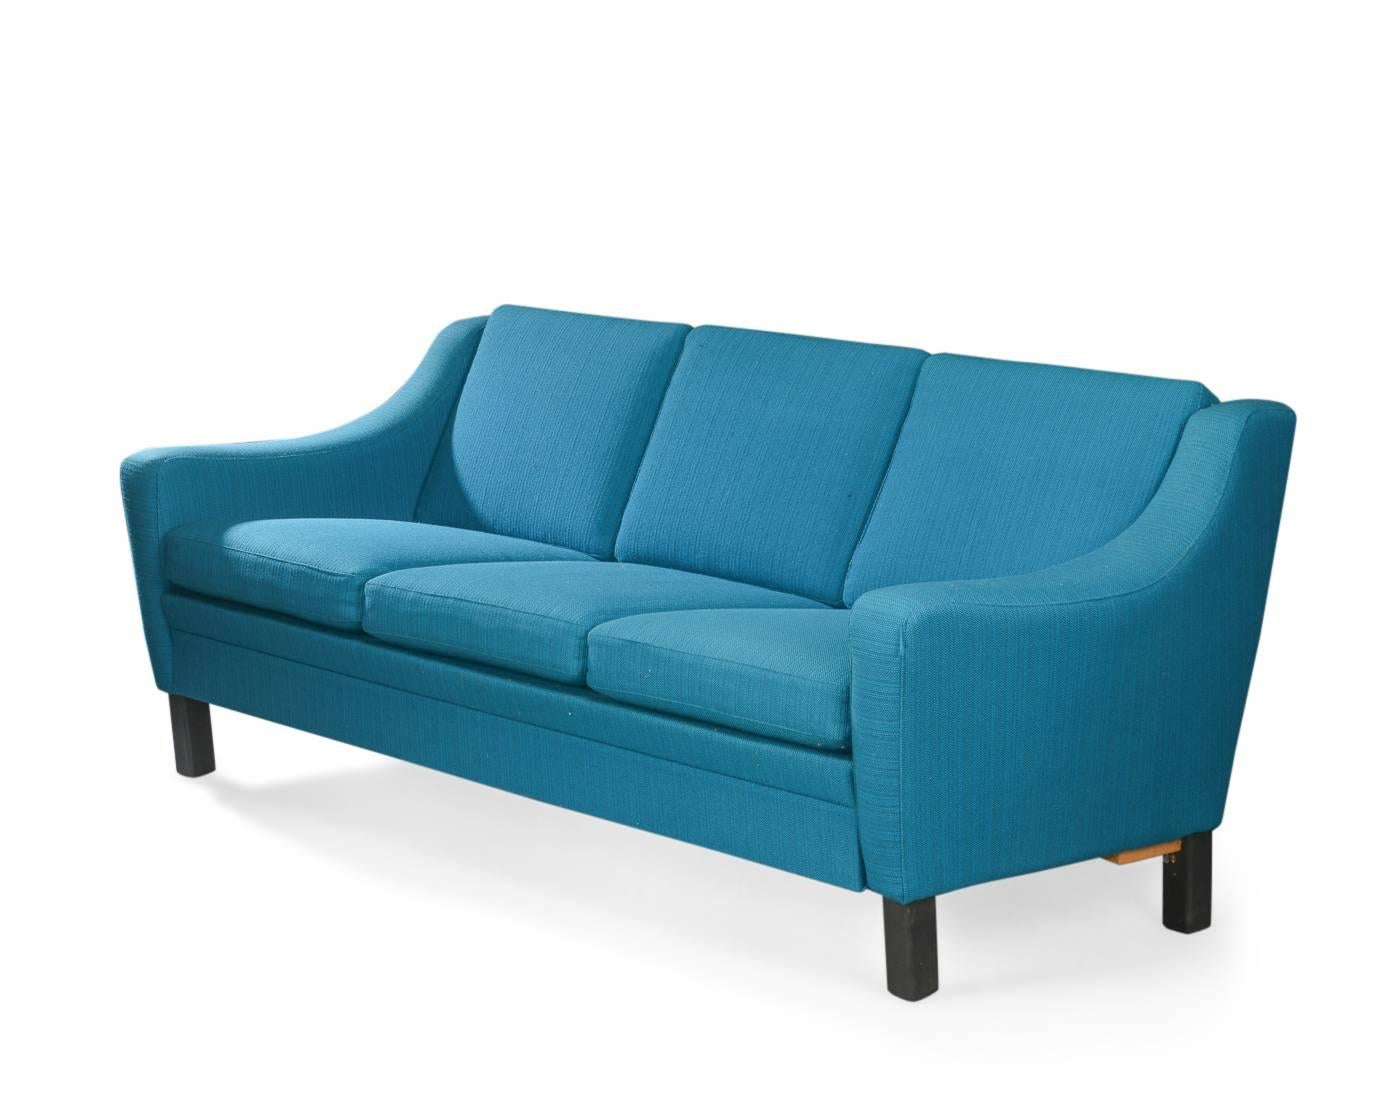 Upholstered sofas upholstered in turquoise wool, soft cushions and legs in black lacquered wood. 
Set consisting of a sofa measure: W. 210, H. 87, D. 79 cm, two small armchairs W. 92 cm
Sofa with repair on hind feet.